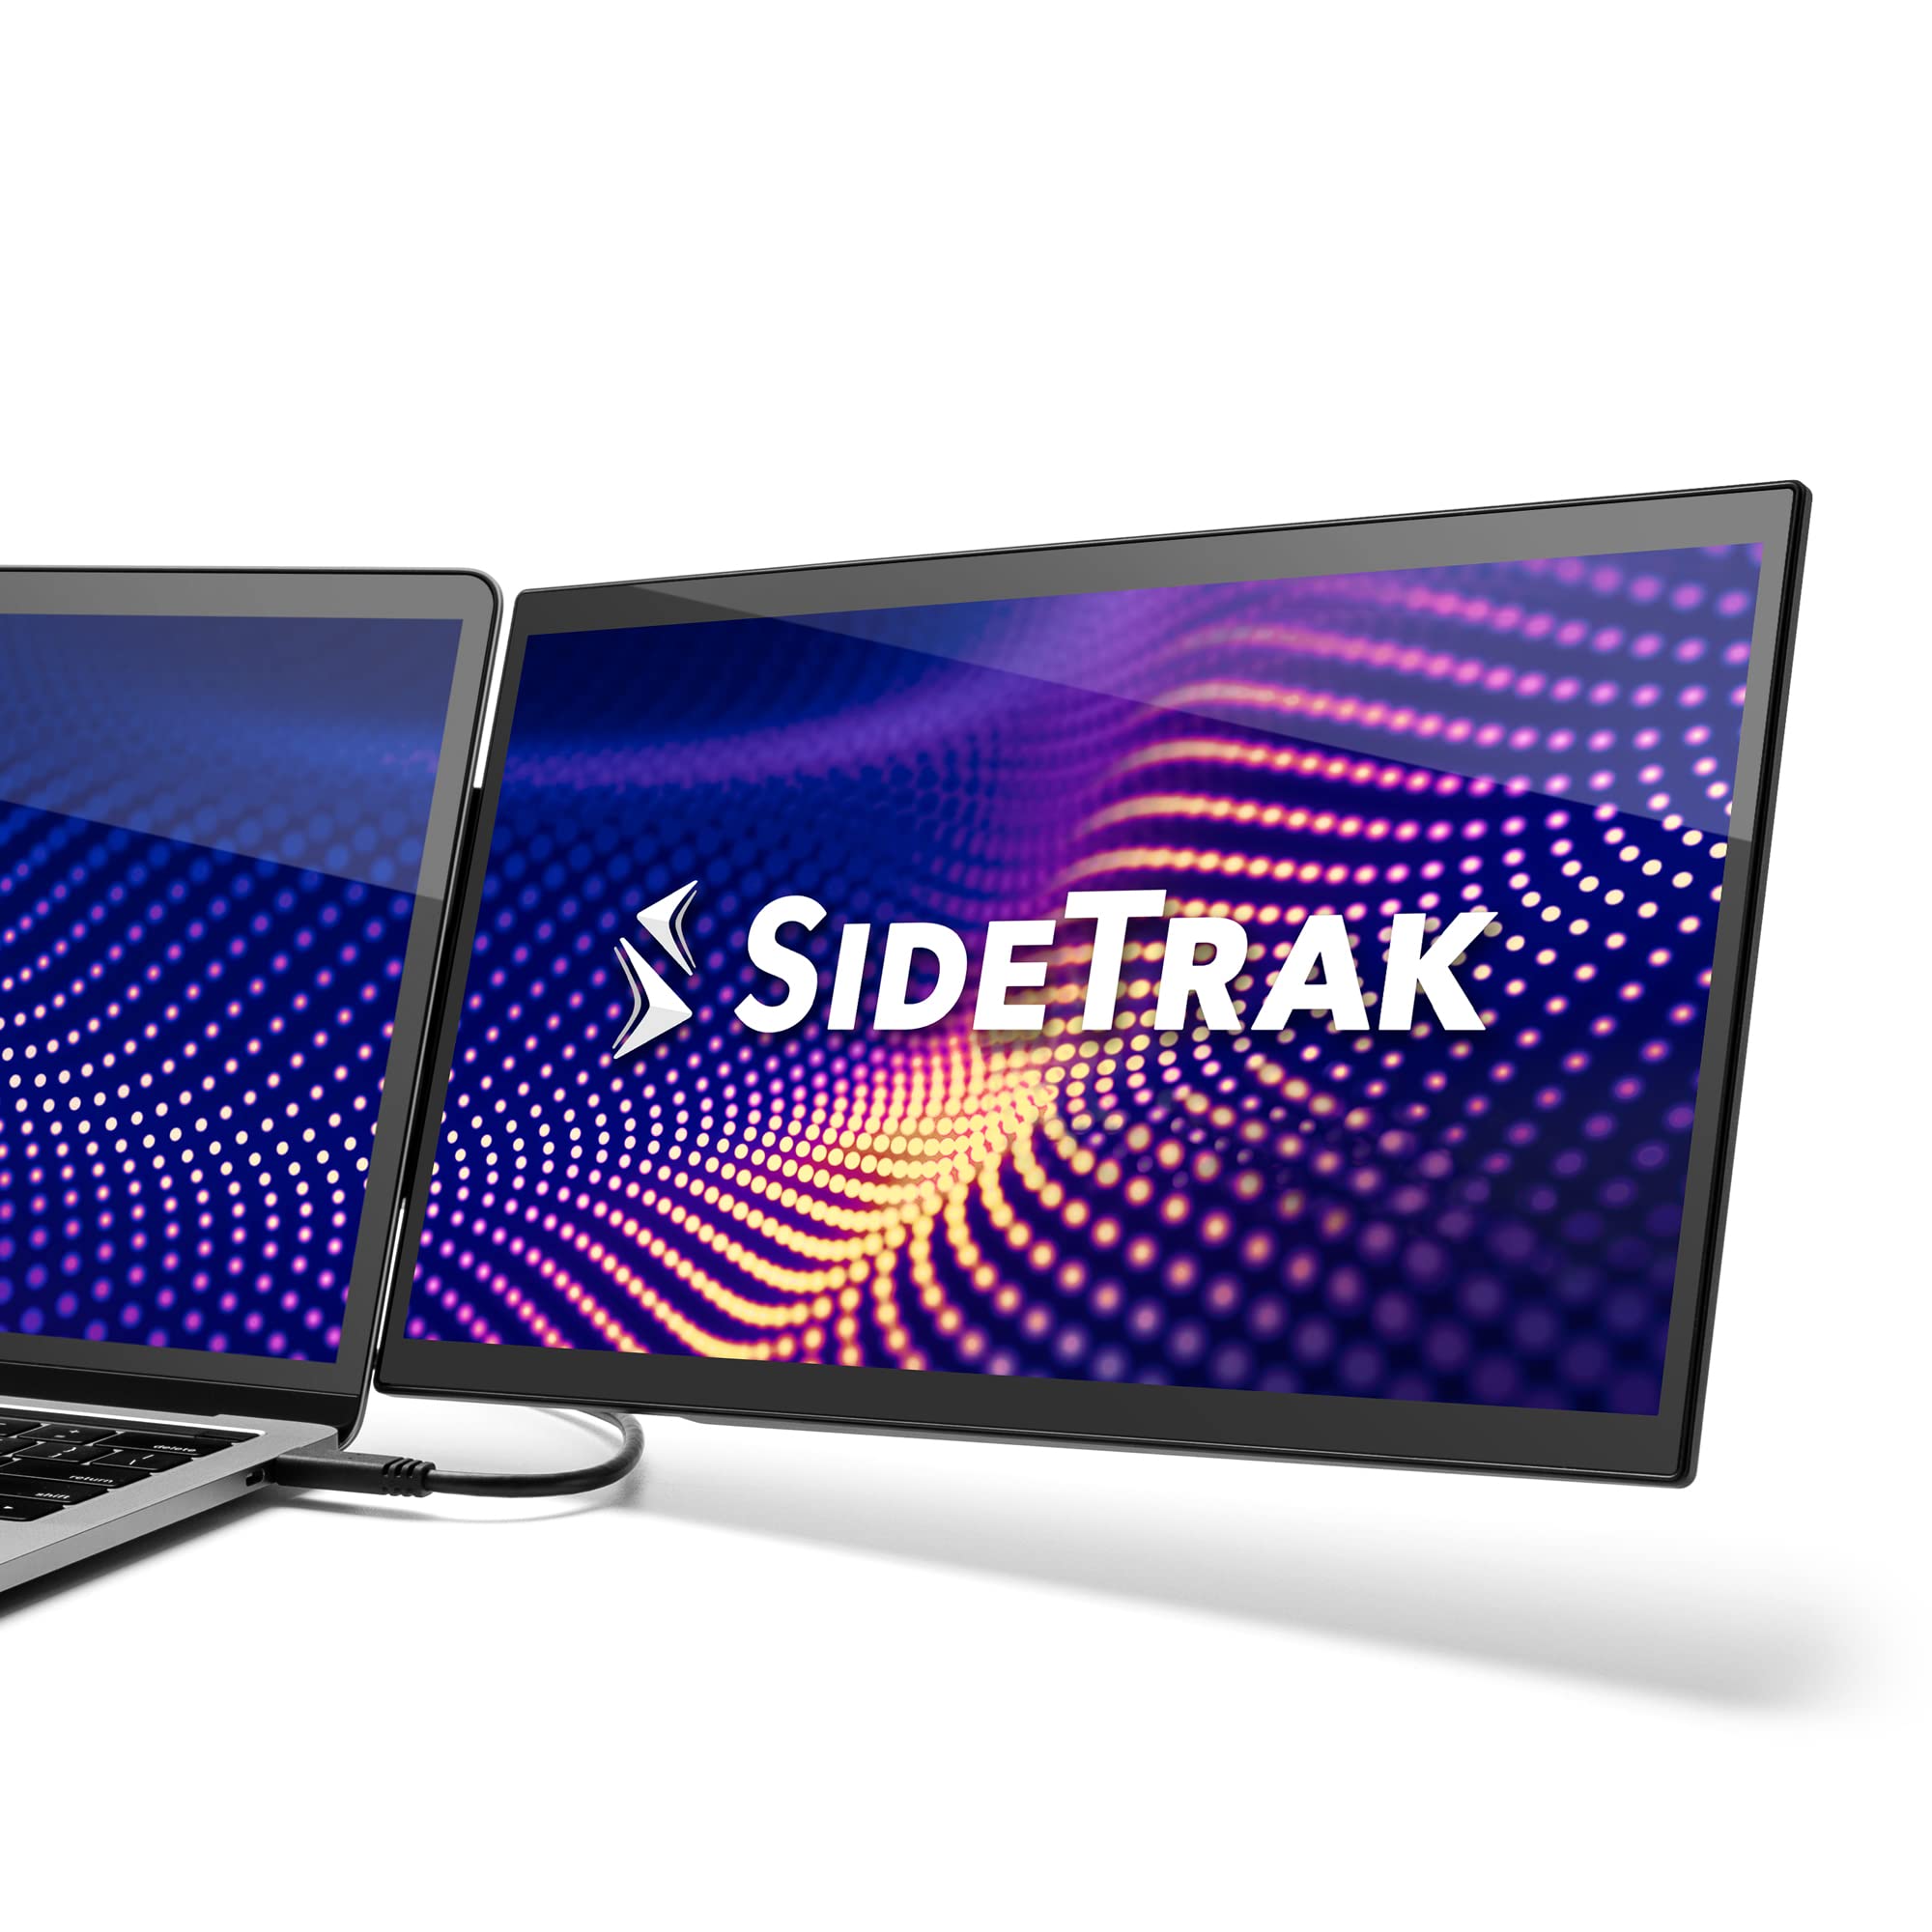 SideTrak Swivel Pro 13.3” | Ultra Slim Attachable Portable Monitor for Laptop | FHD IPS Rotating Dual Laptop Screen | Mac, PC, & Chrome Compatible | USB-C Connection